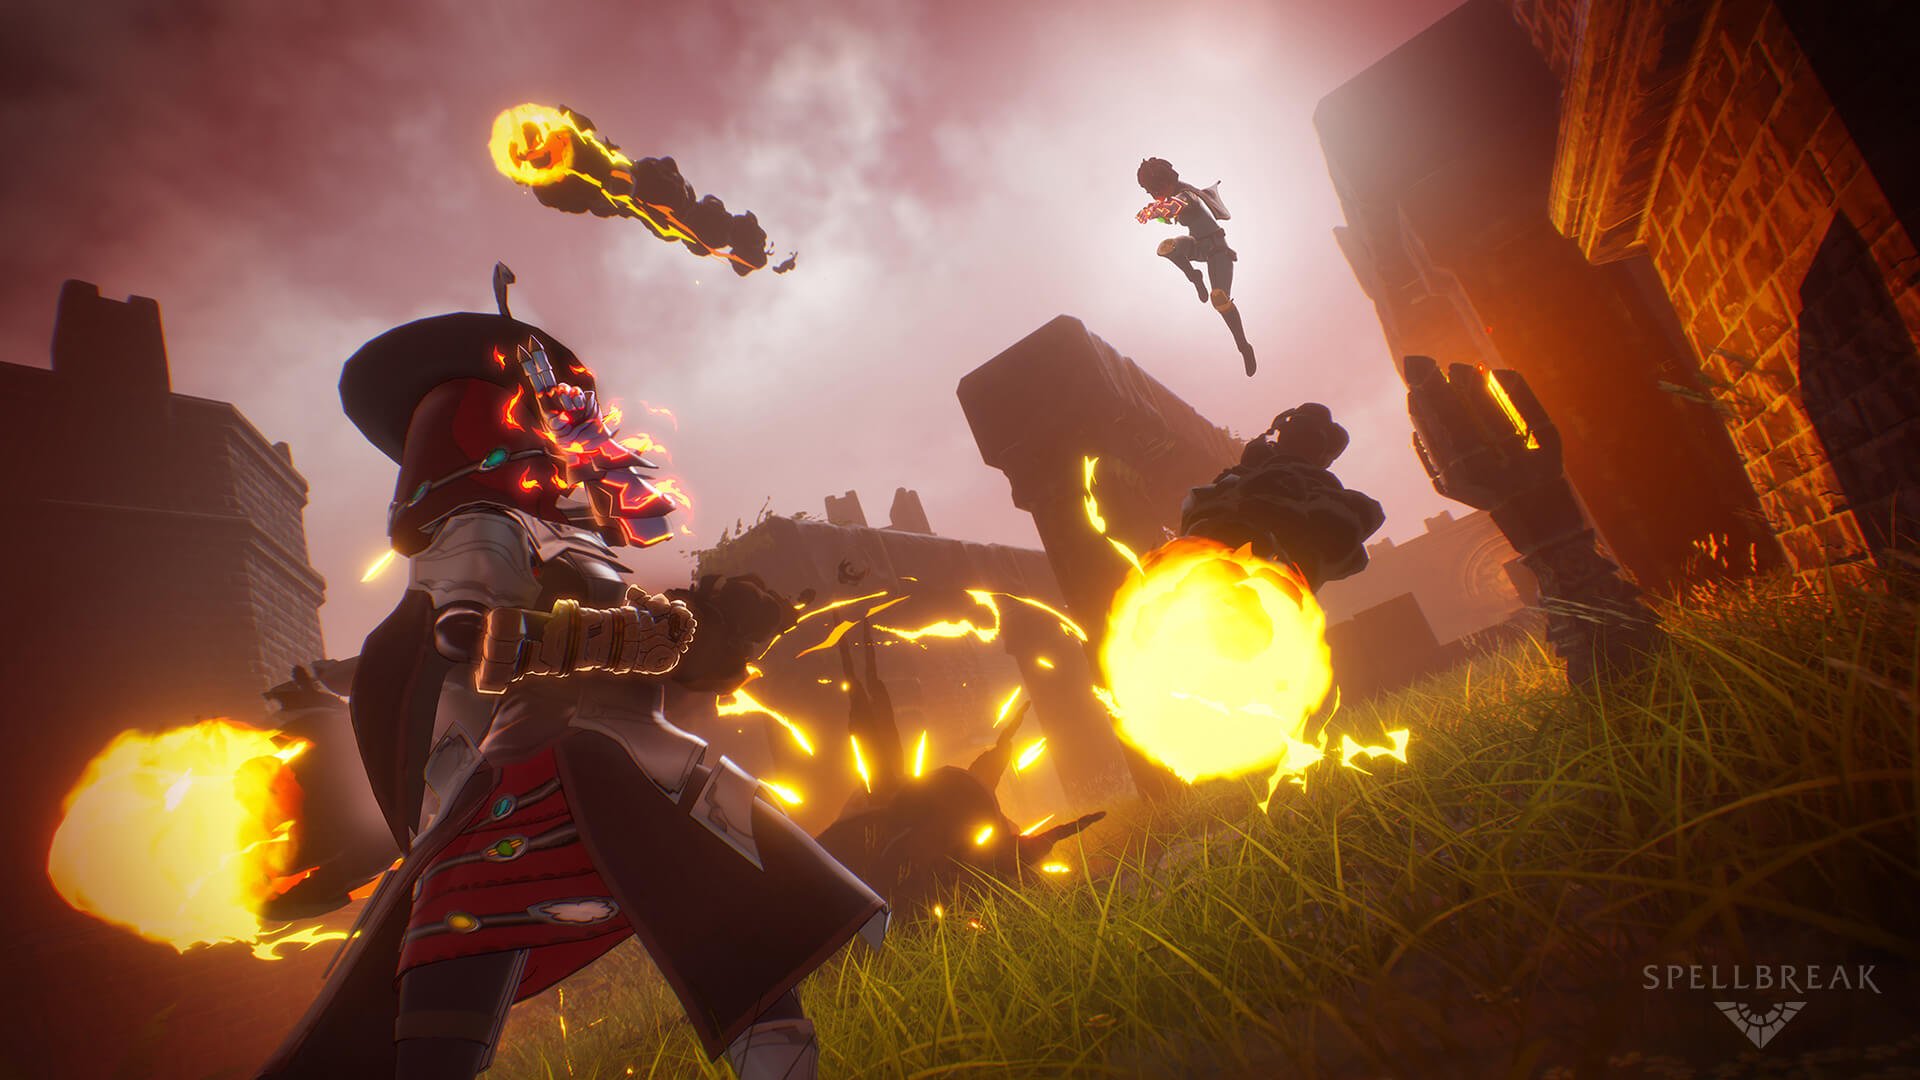 Spellbreak is a unique battle royale game that combines magic, roguelike,  and RPG elements - Unreal Engine